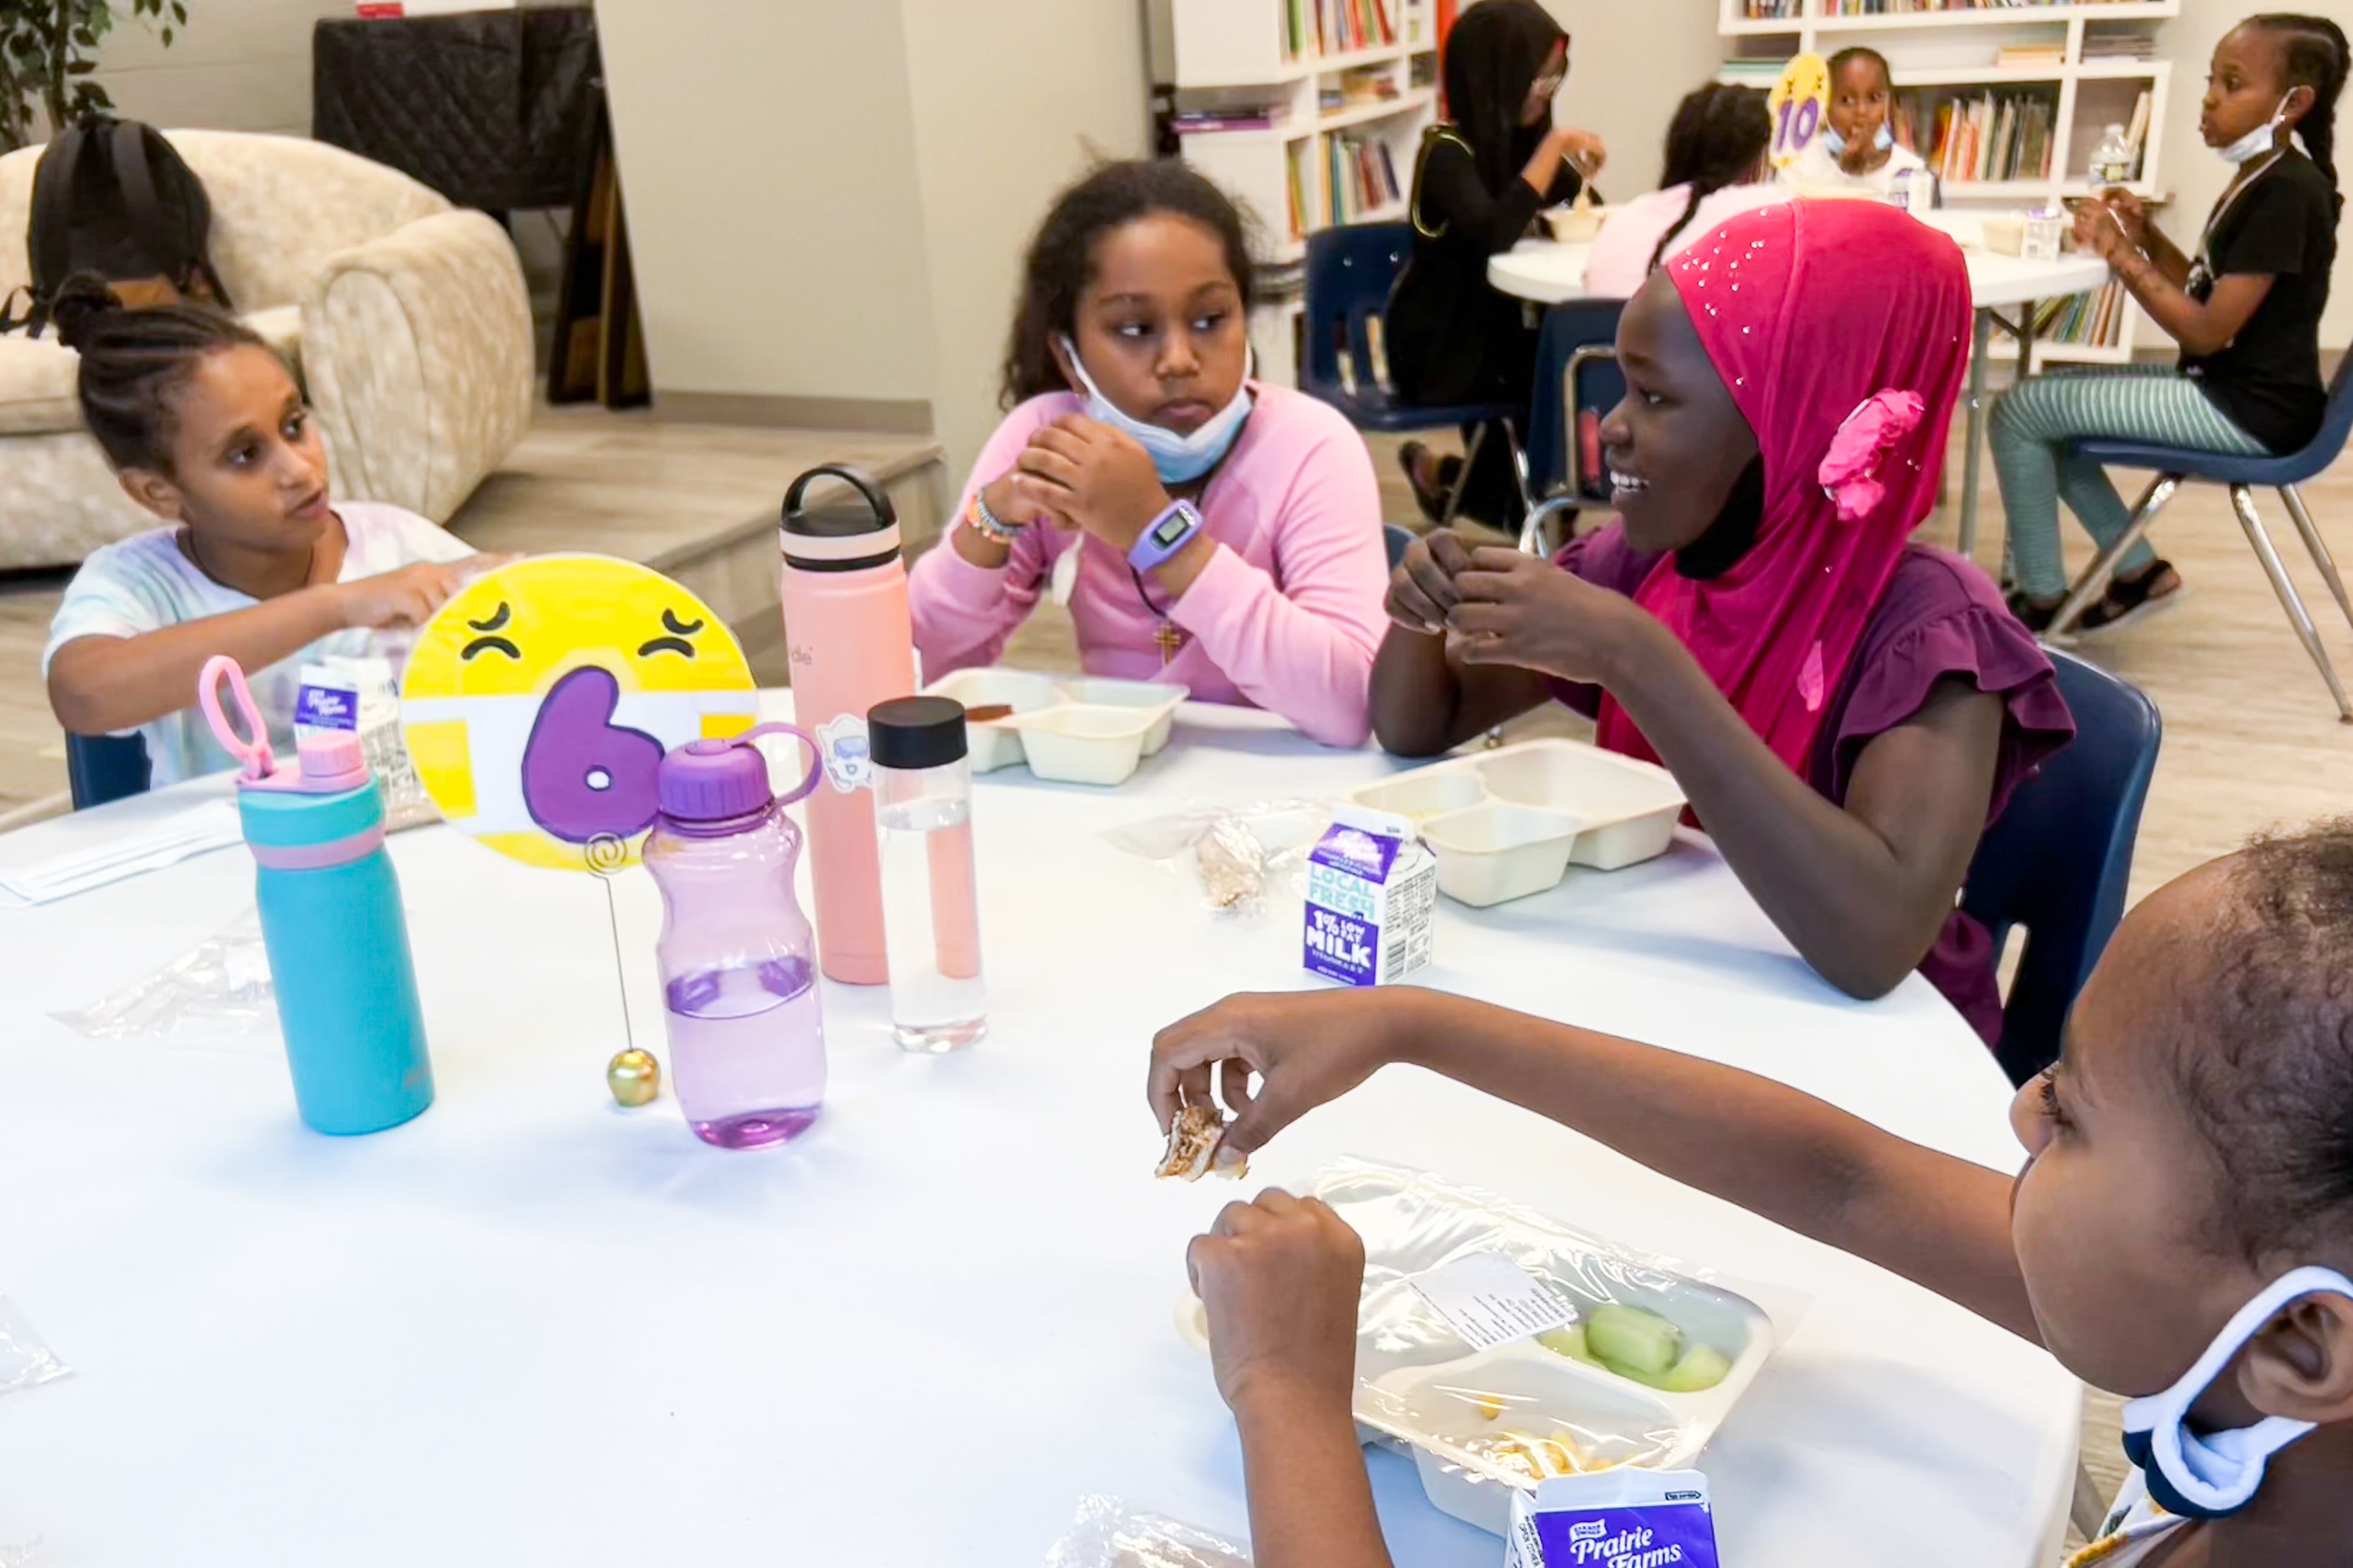 Four children are sitting at a table talking to one another as they eat lunch. Their lunches, milk cartons, and water bottles are all on the table.